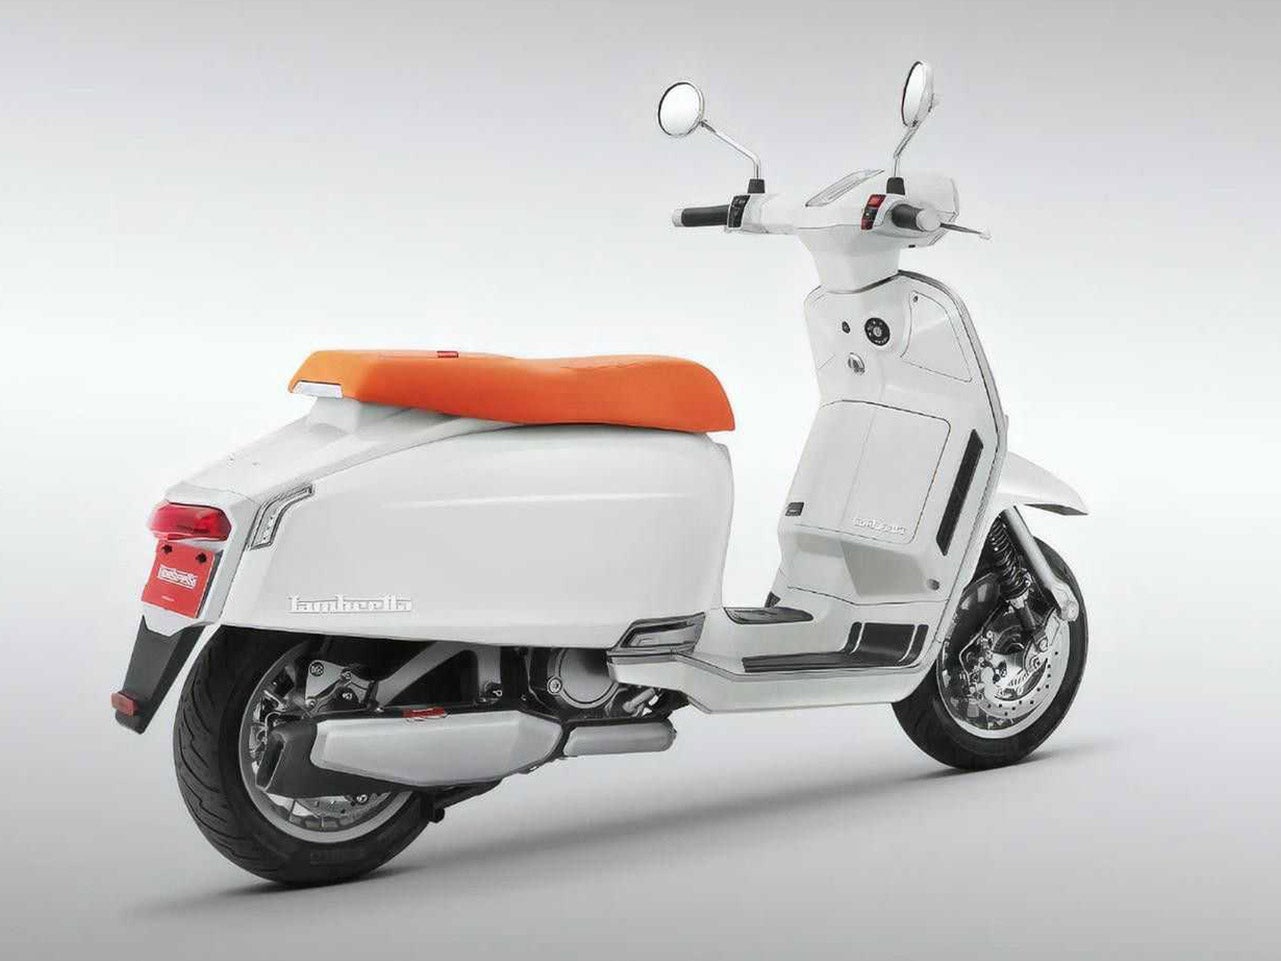 Scooter Icon Lambretta Resurfaces With Two New Models - Adventure